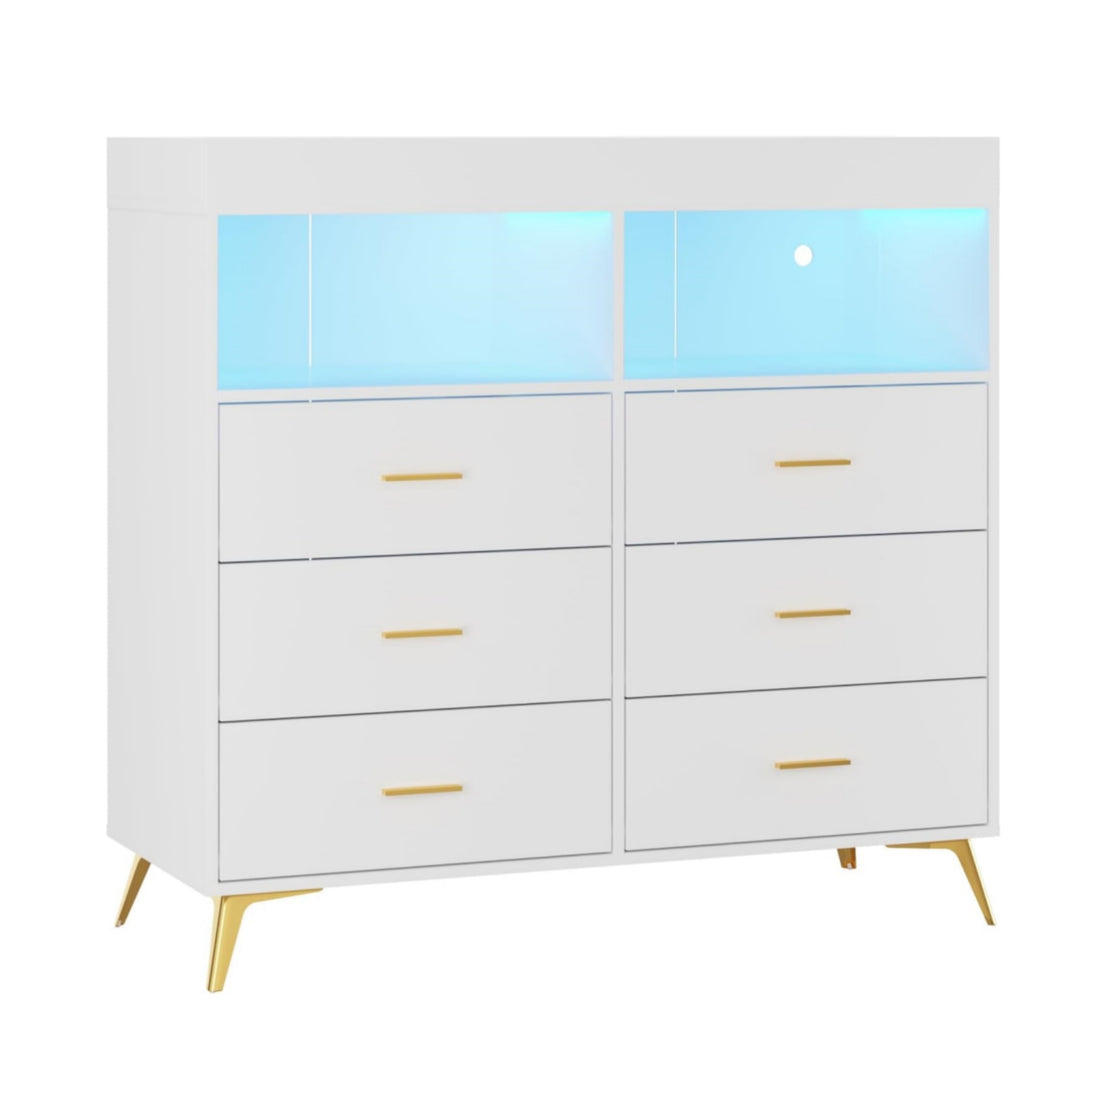 6 Drawer Dresser for Bedroom with LED Lights and Power Outlet, Wide Chest of Drawers with 2 Open Storage Shelves, Baby Changing Table with Removable Changing Table Top, White